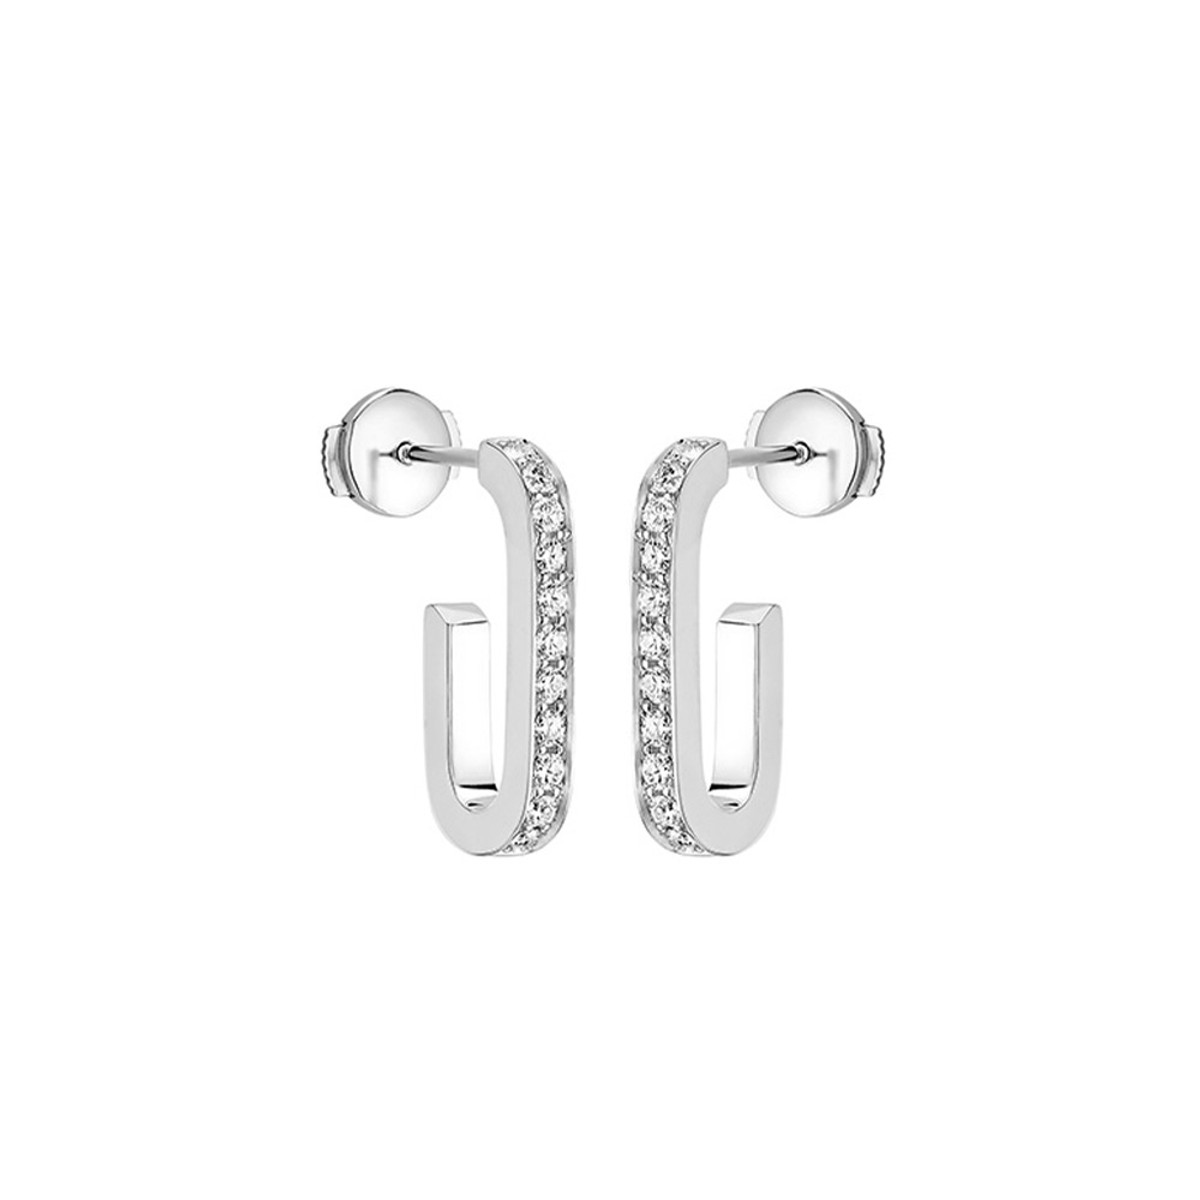 Dinh Van 18K White Gold Maillon Hoop Earrings-60450 Product Image